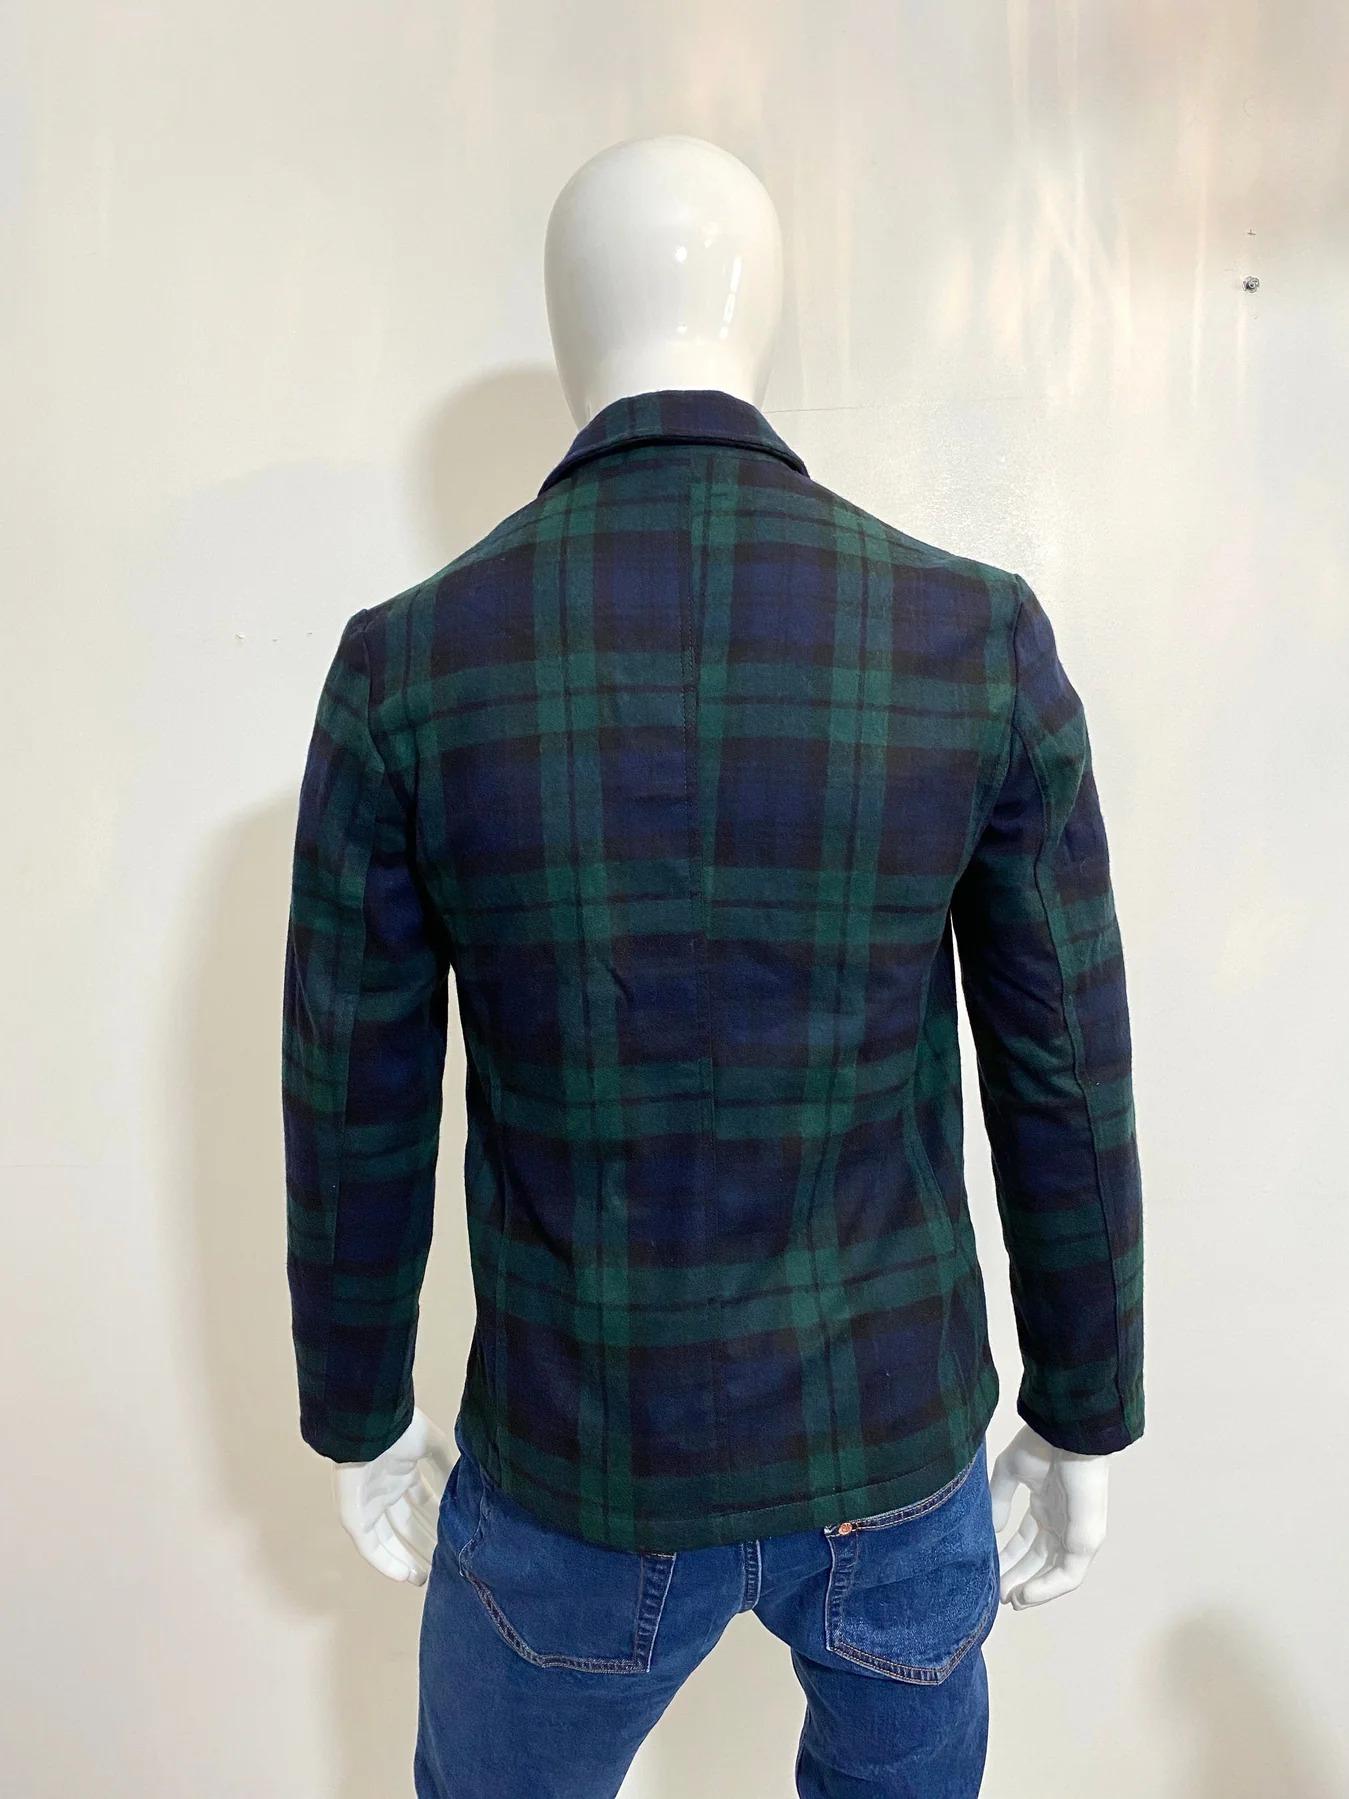 NNO7 Plaid Jacket In Excellent Condition For Sale In London, GB